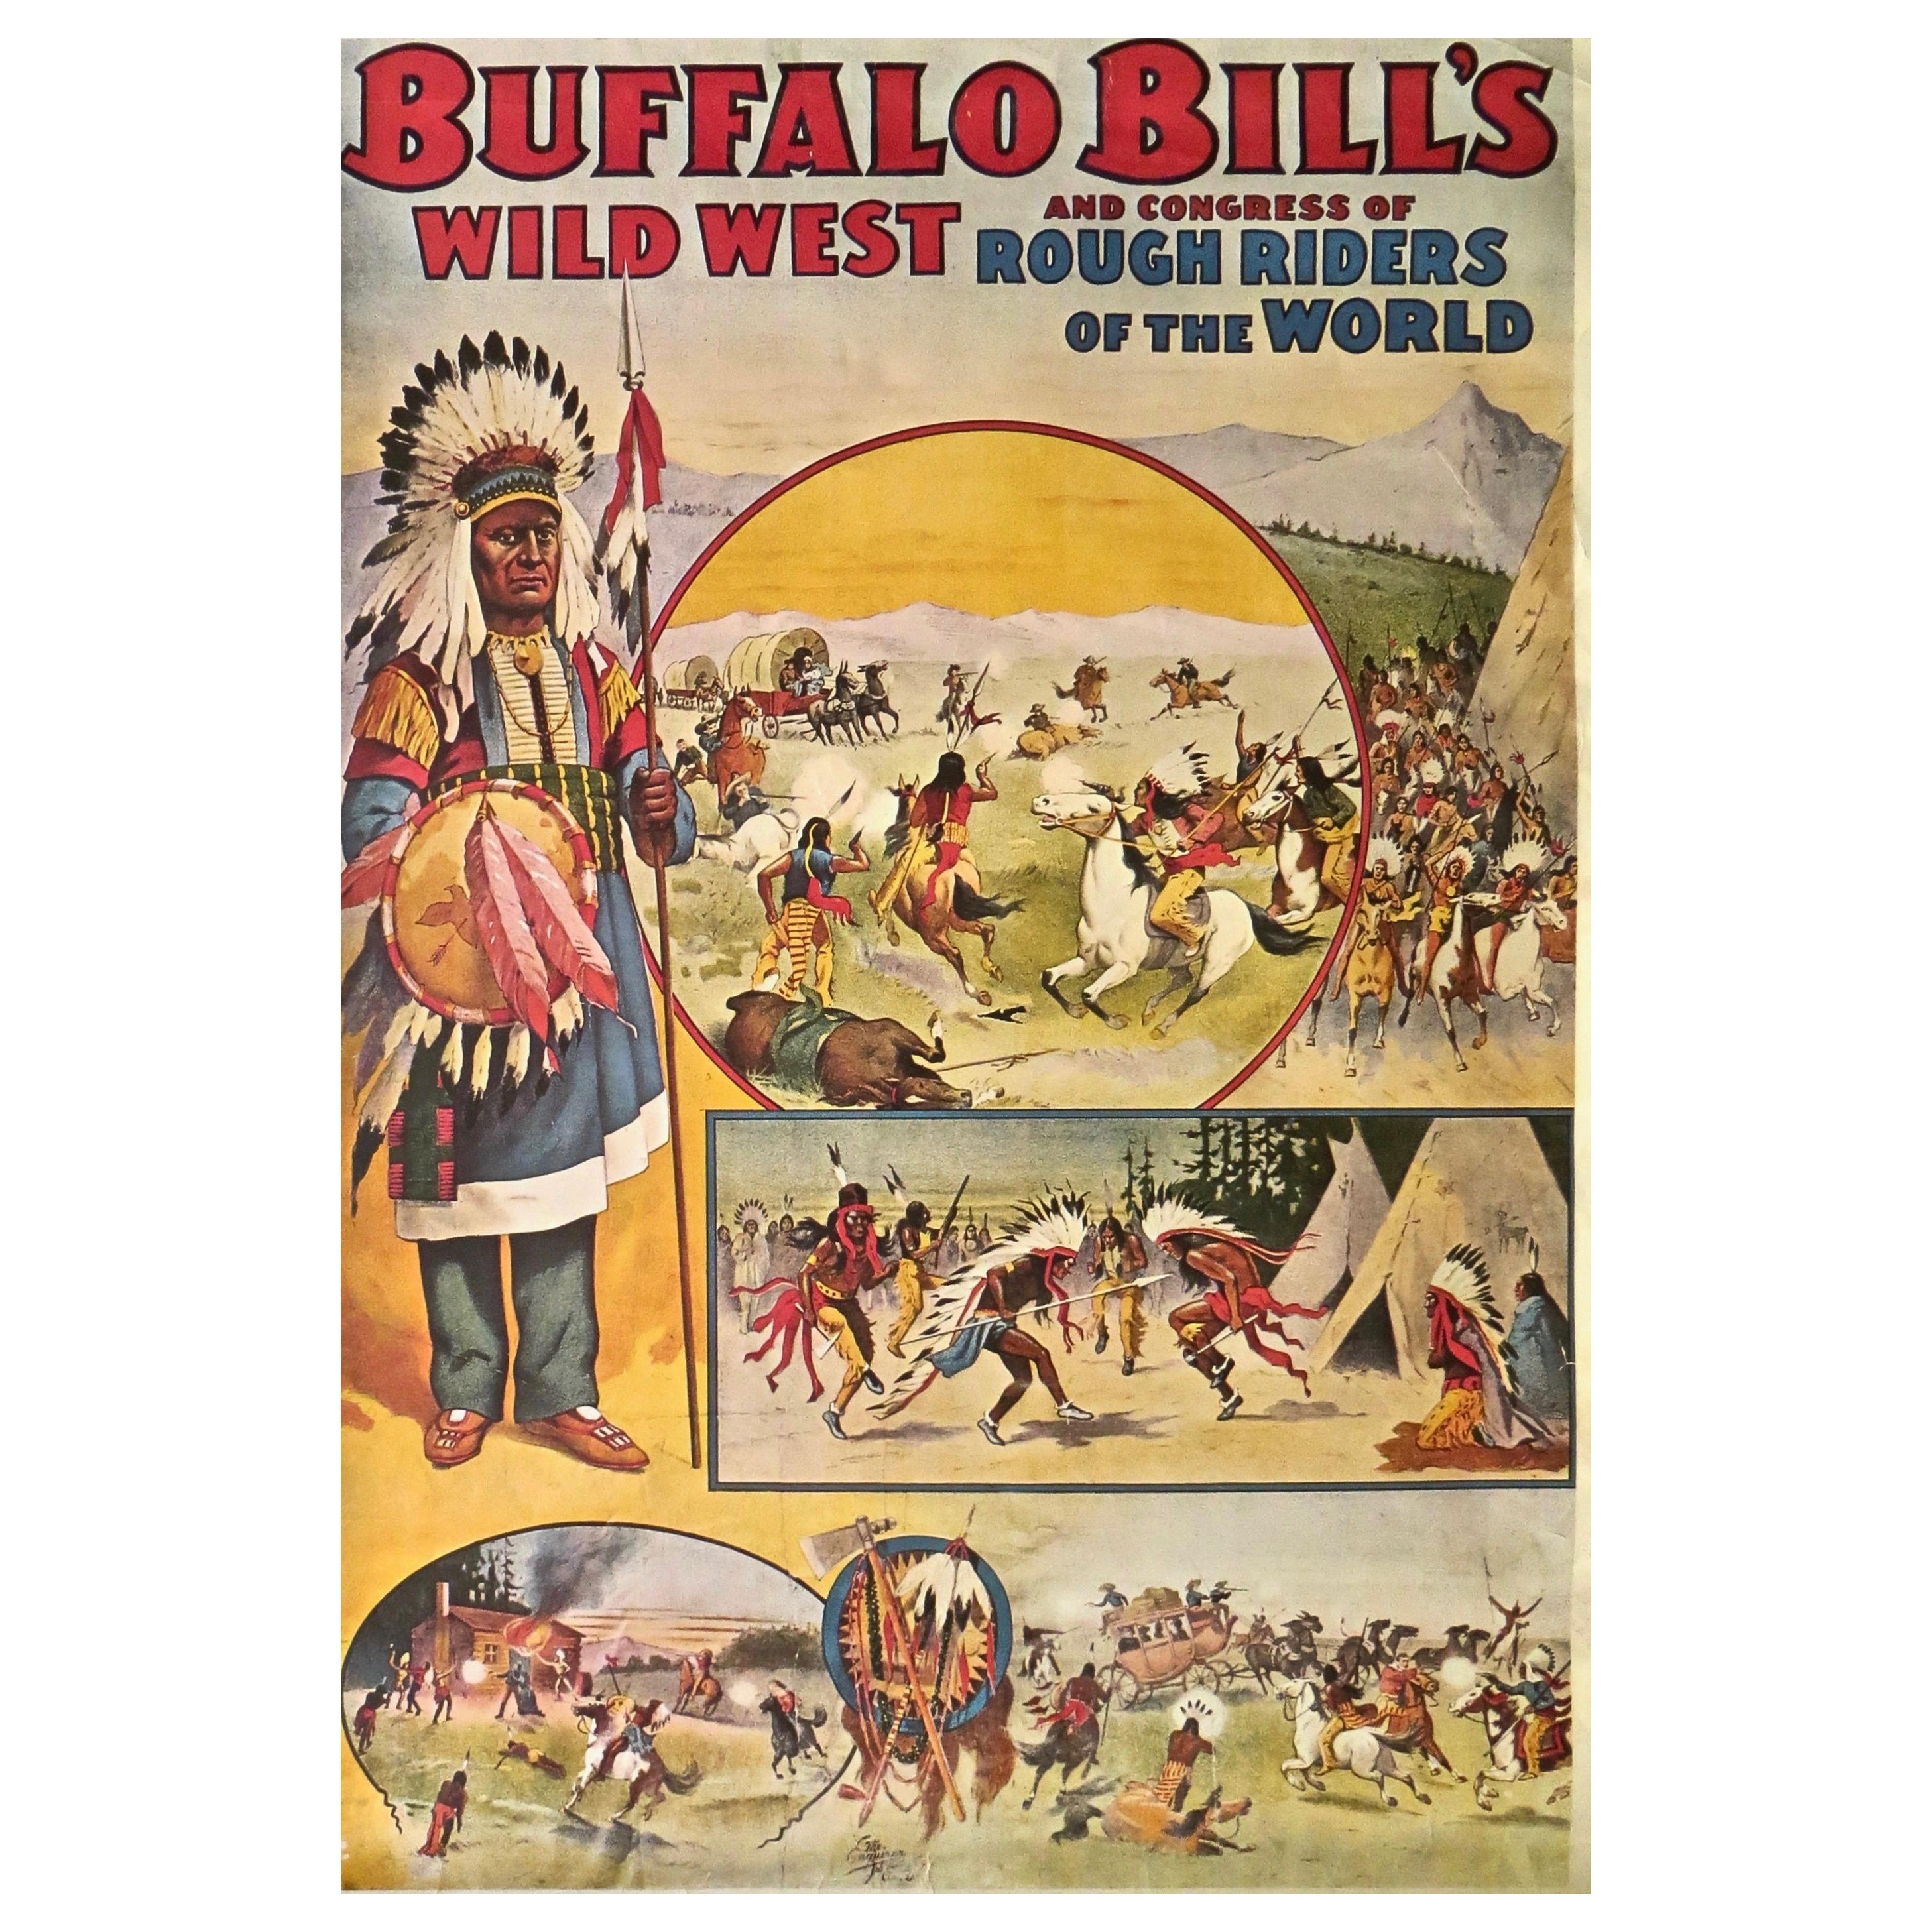 Circus Poster by Ringling Bros, circa 1971 "Buffalo Bill’s Wild West" For Sale